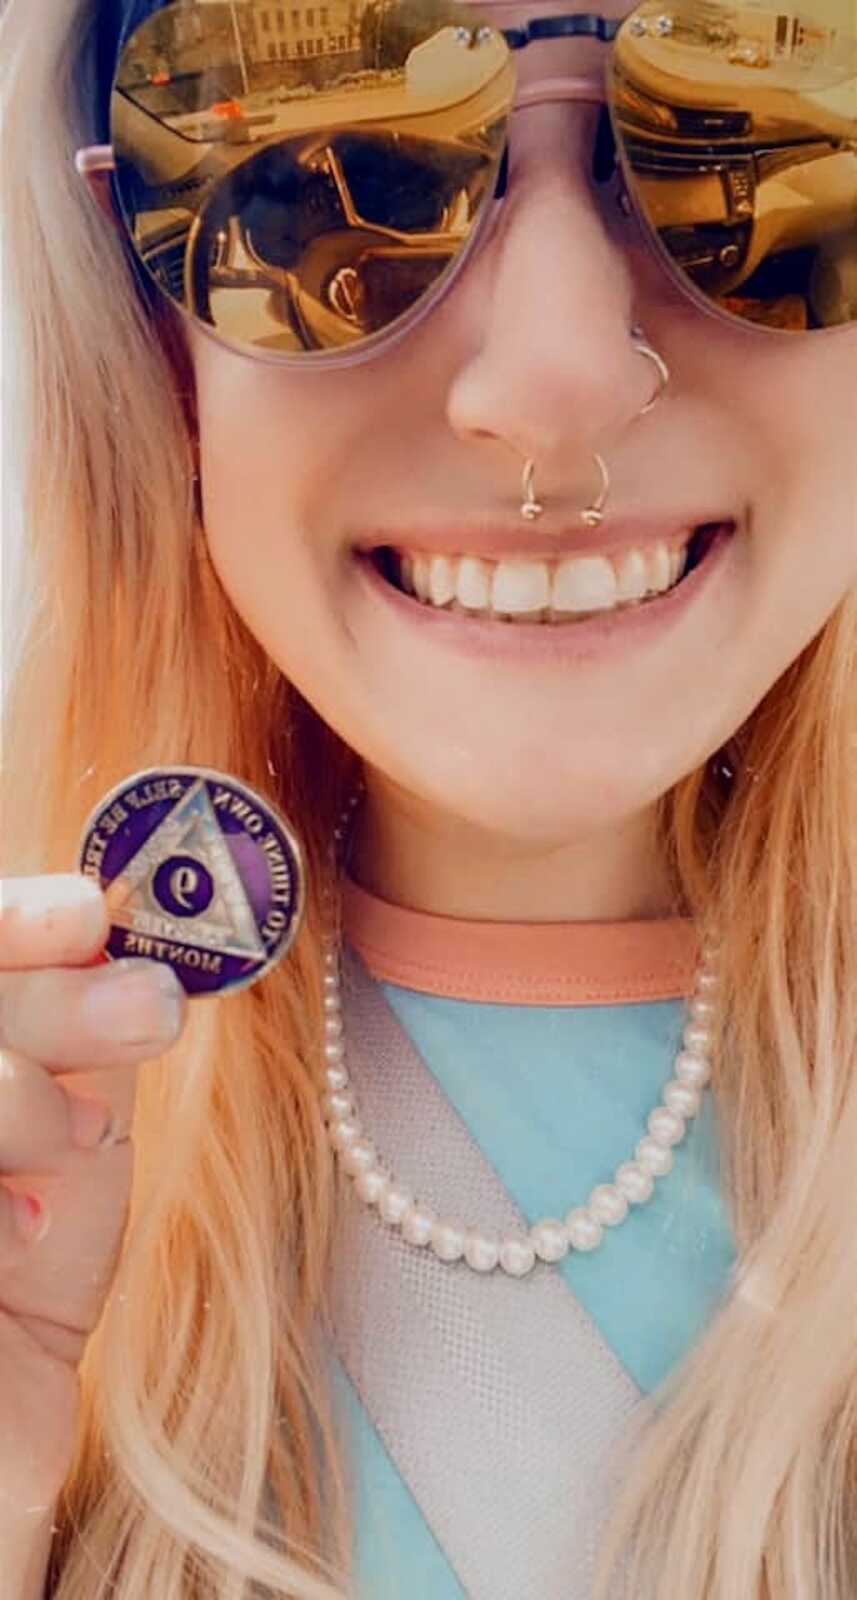 Recovered alcohol addict smiling and holding a '9 months sober' coin